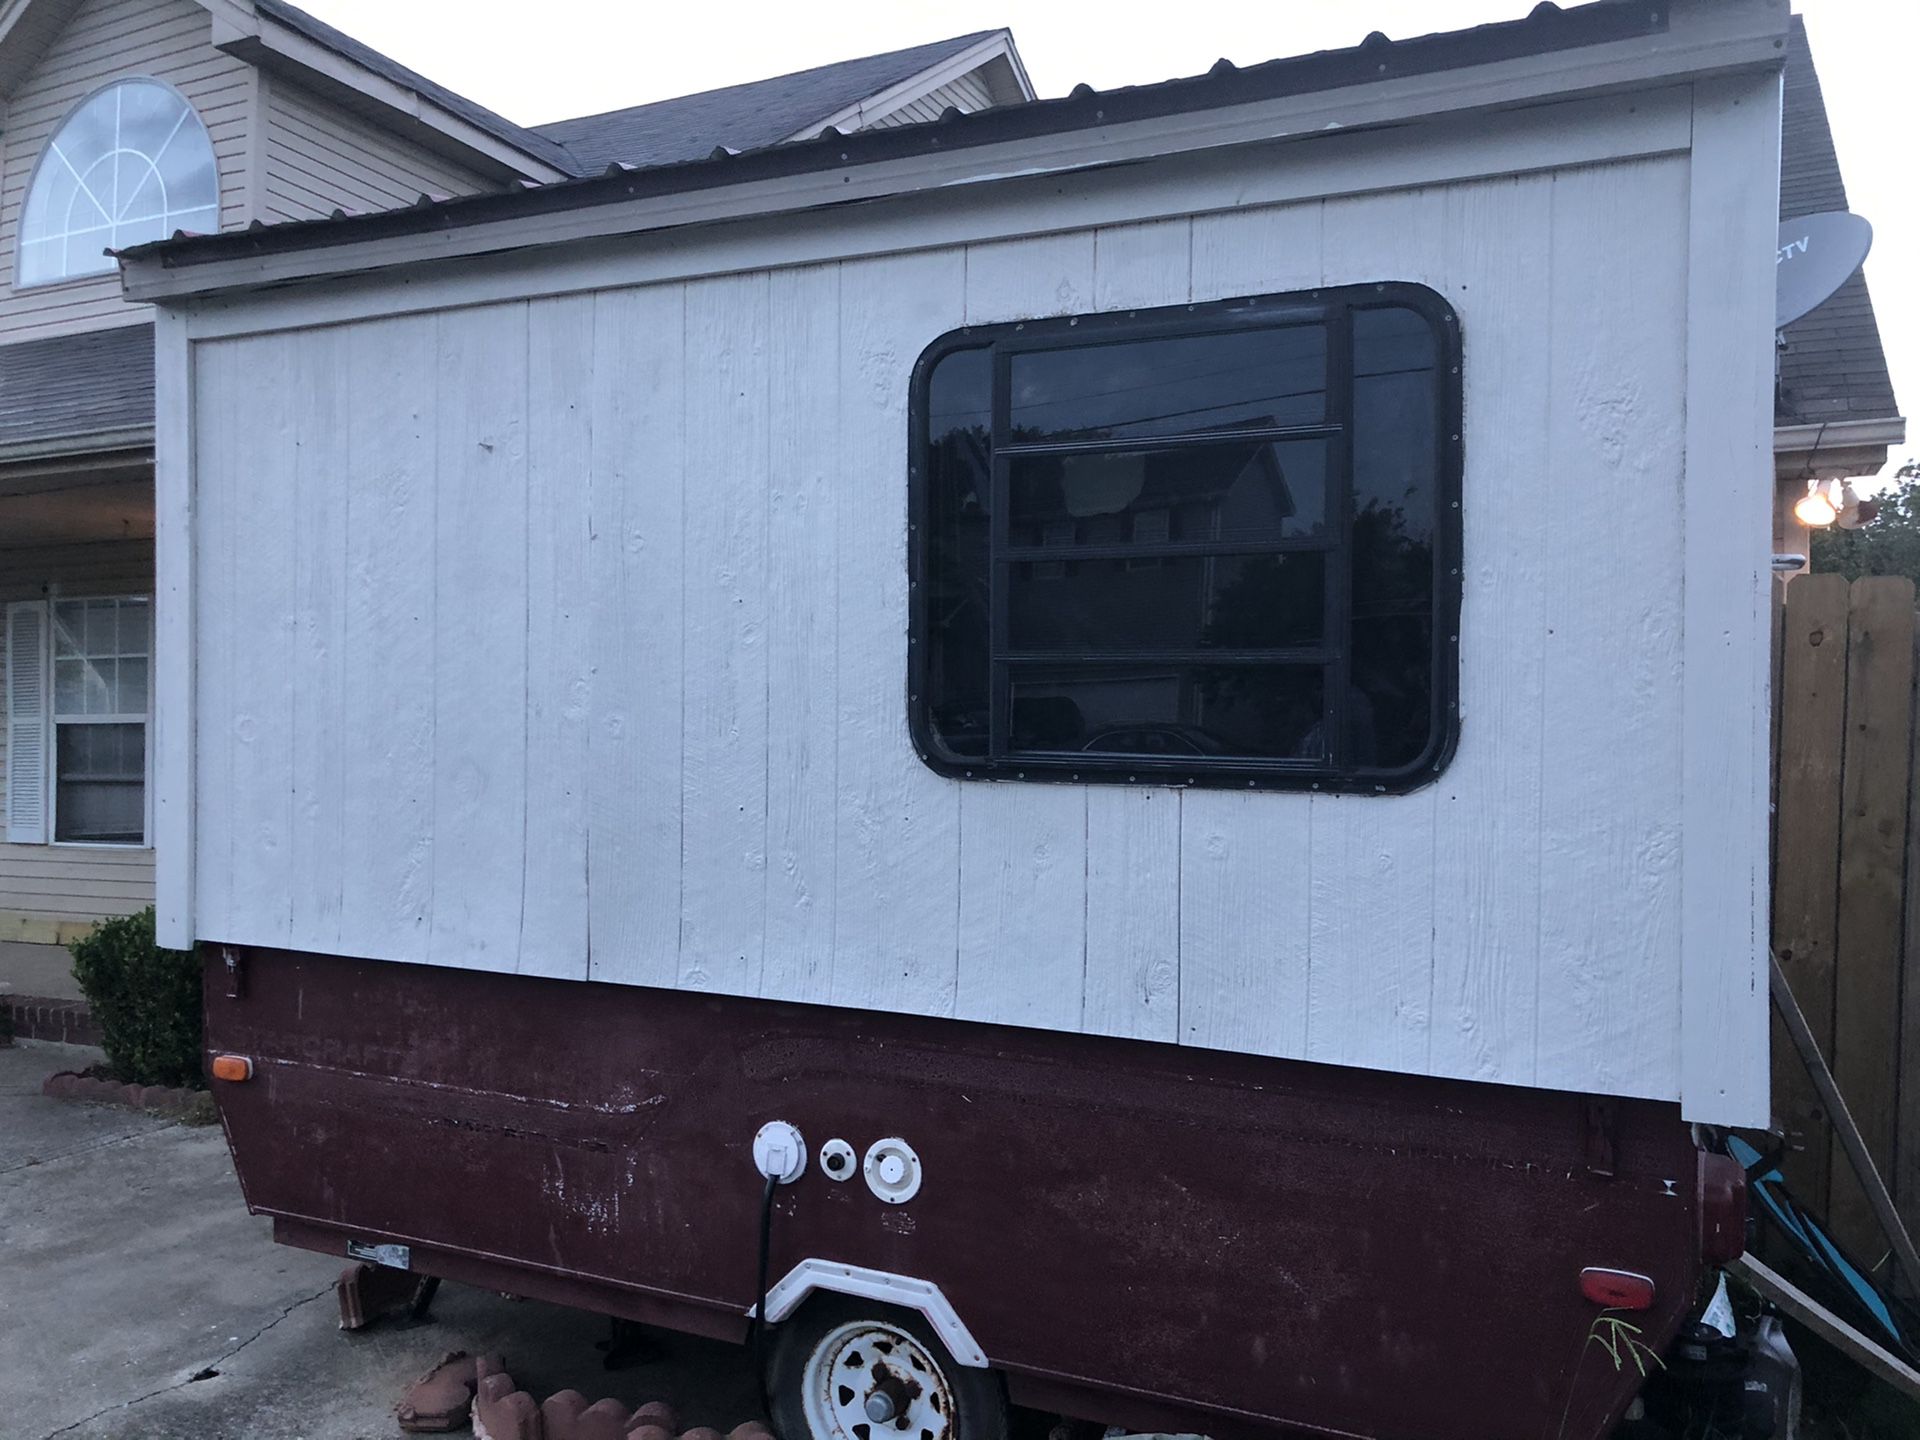 This is a very solid trailer it’s currently being used as a storage inside it is complete I’m getting the stuff out now For catering truck for camper